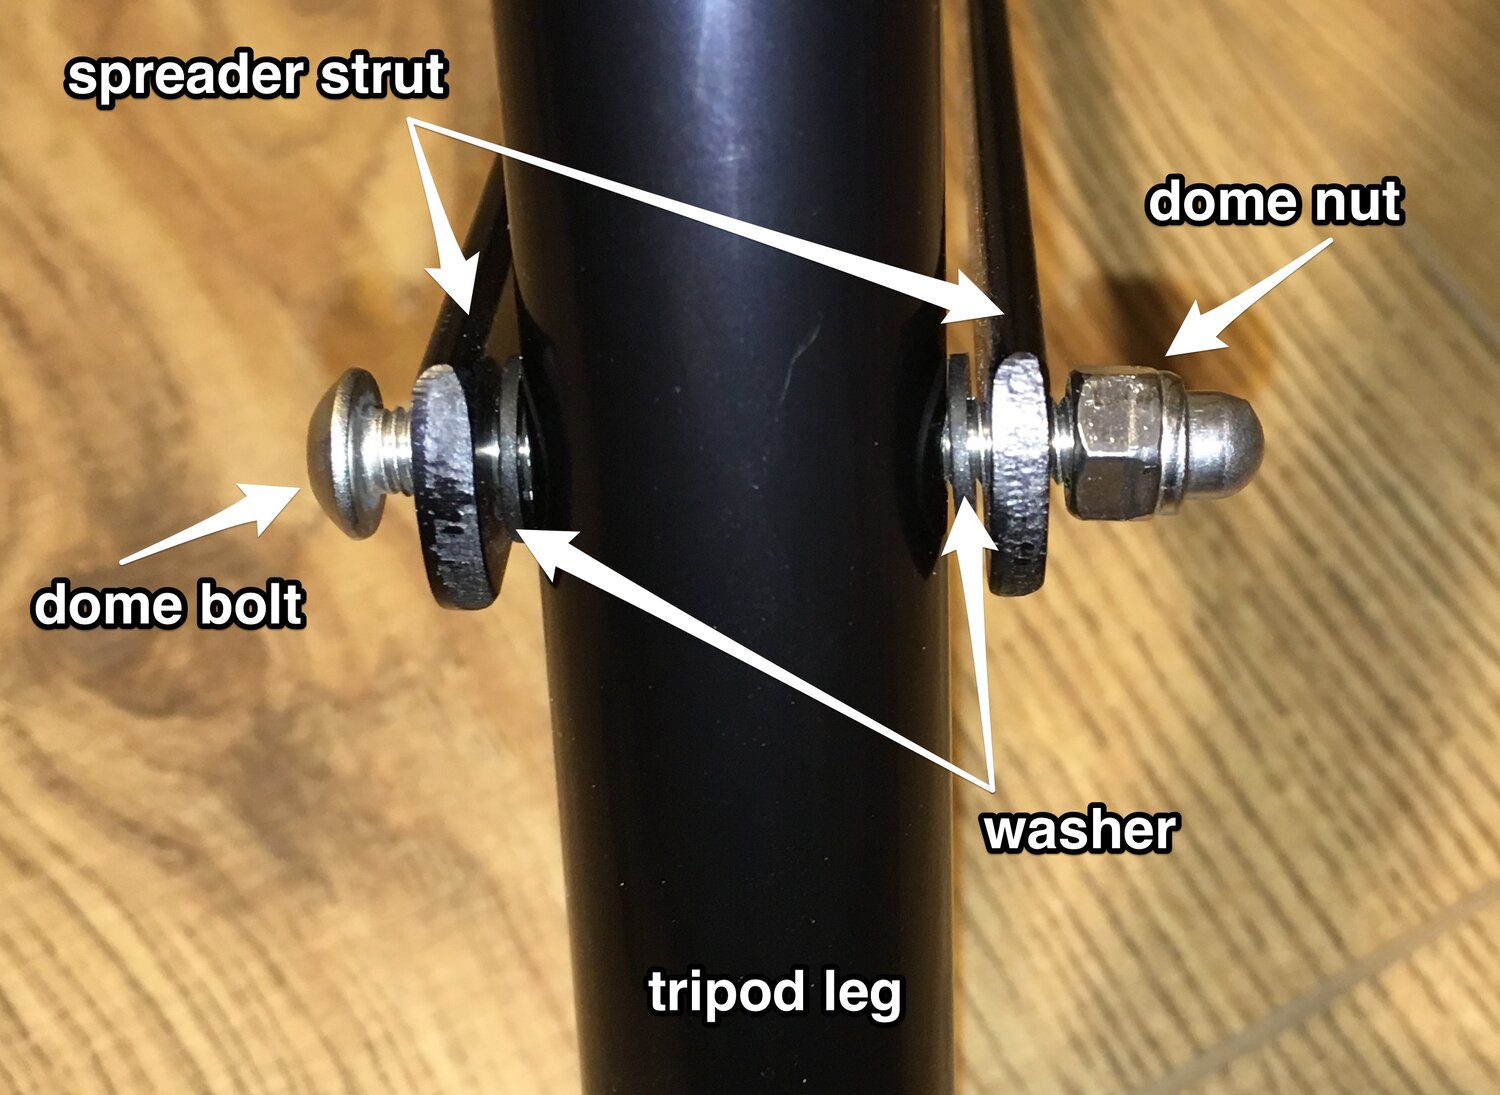 spreader strut and leg assembly, untightened